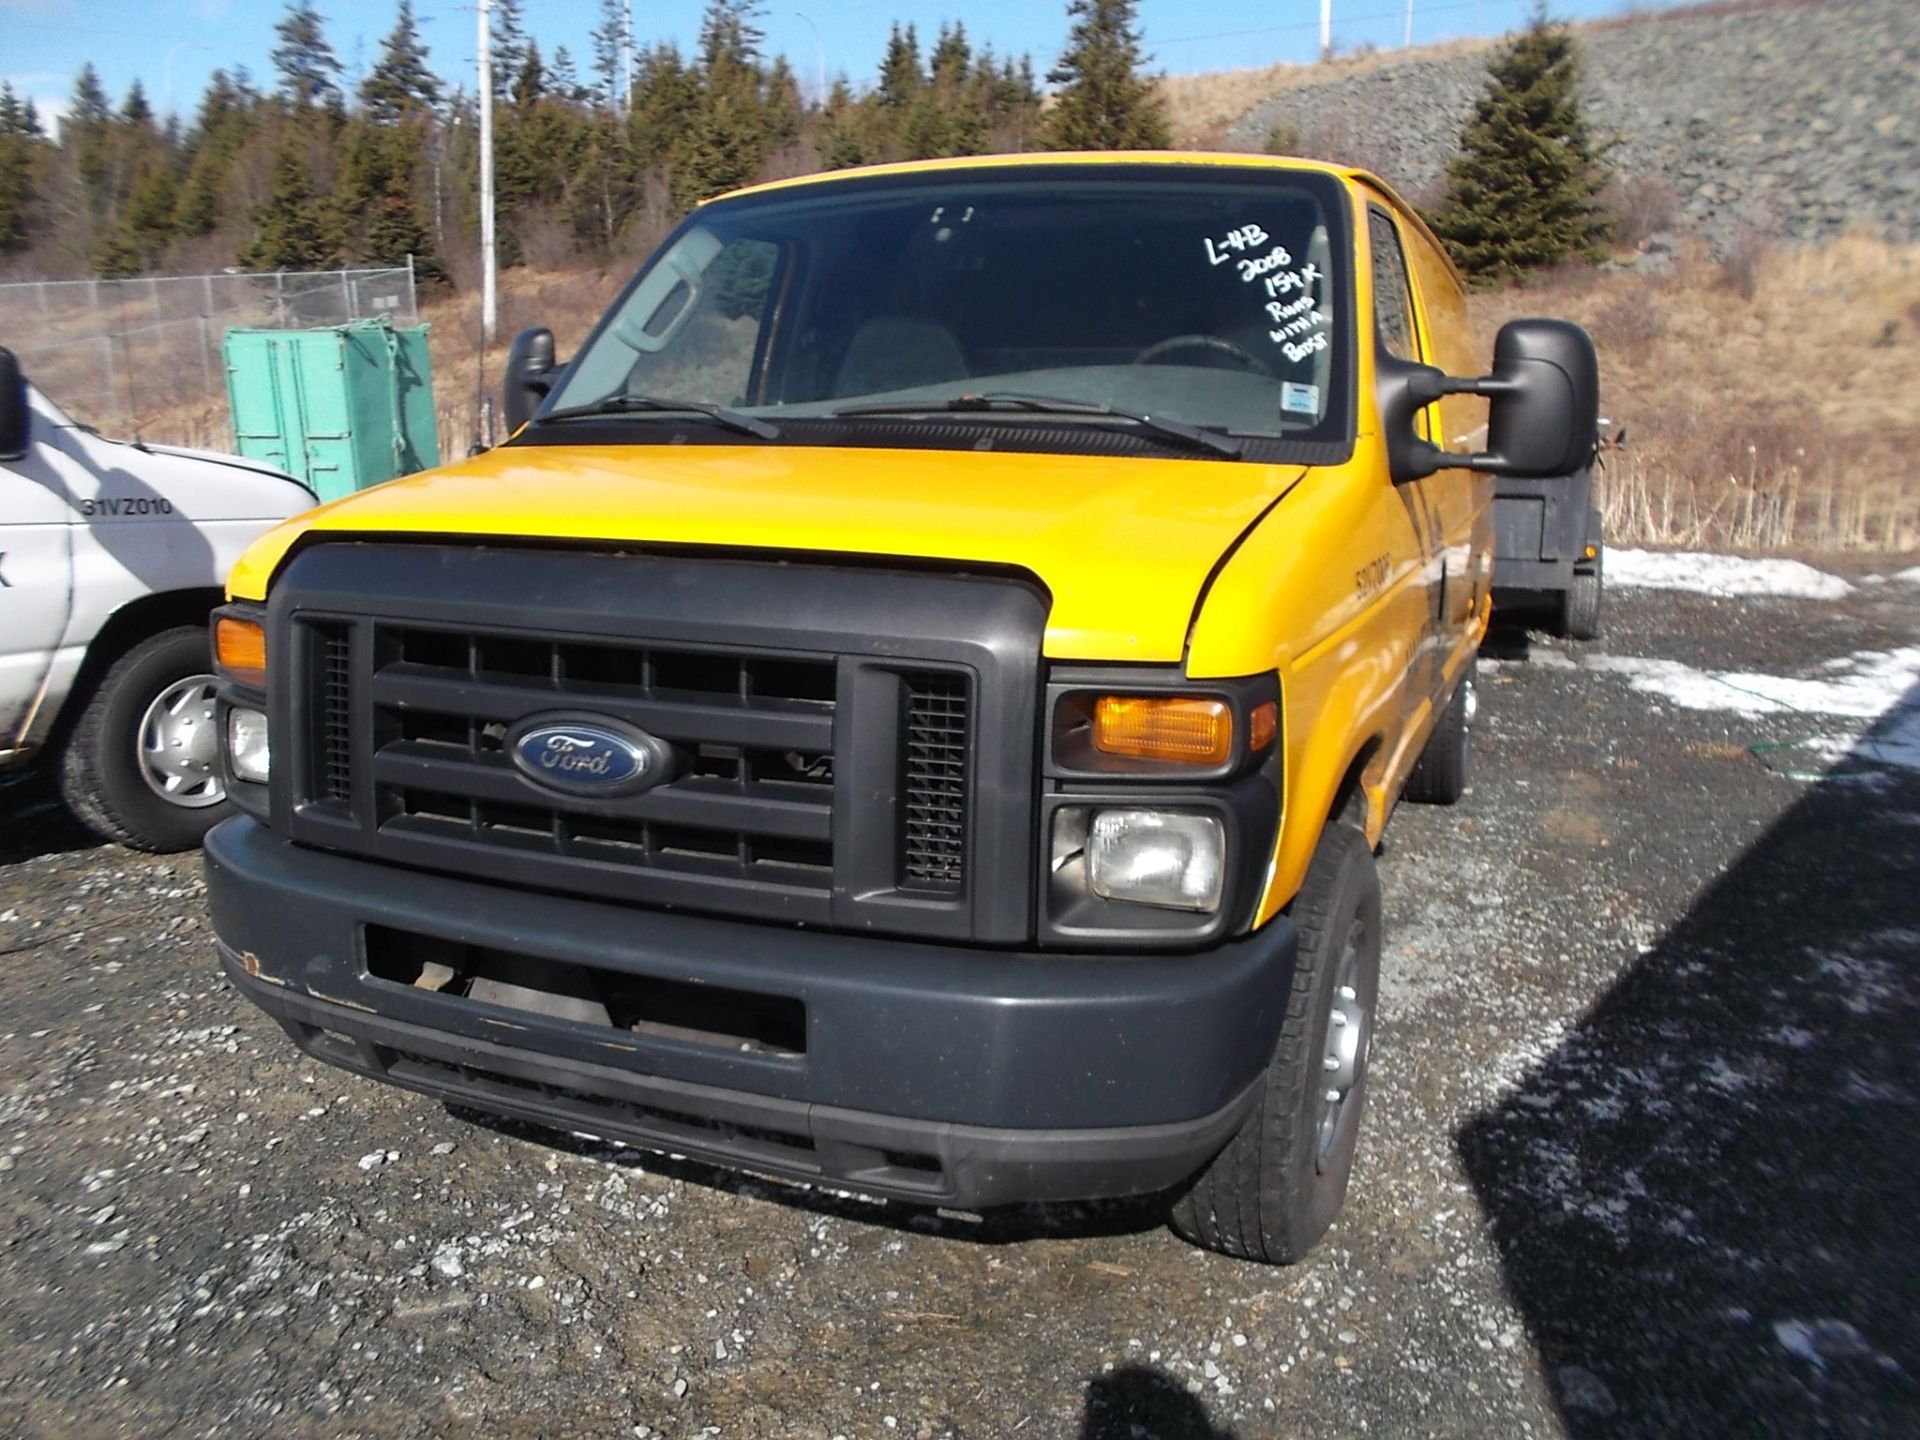 2008 FORD E250 VAN 154919KMS, RUNS WITH A BOOST, 5.4 LITRE, AUTOMATIC, AC, POWER STEERING, POWER